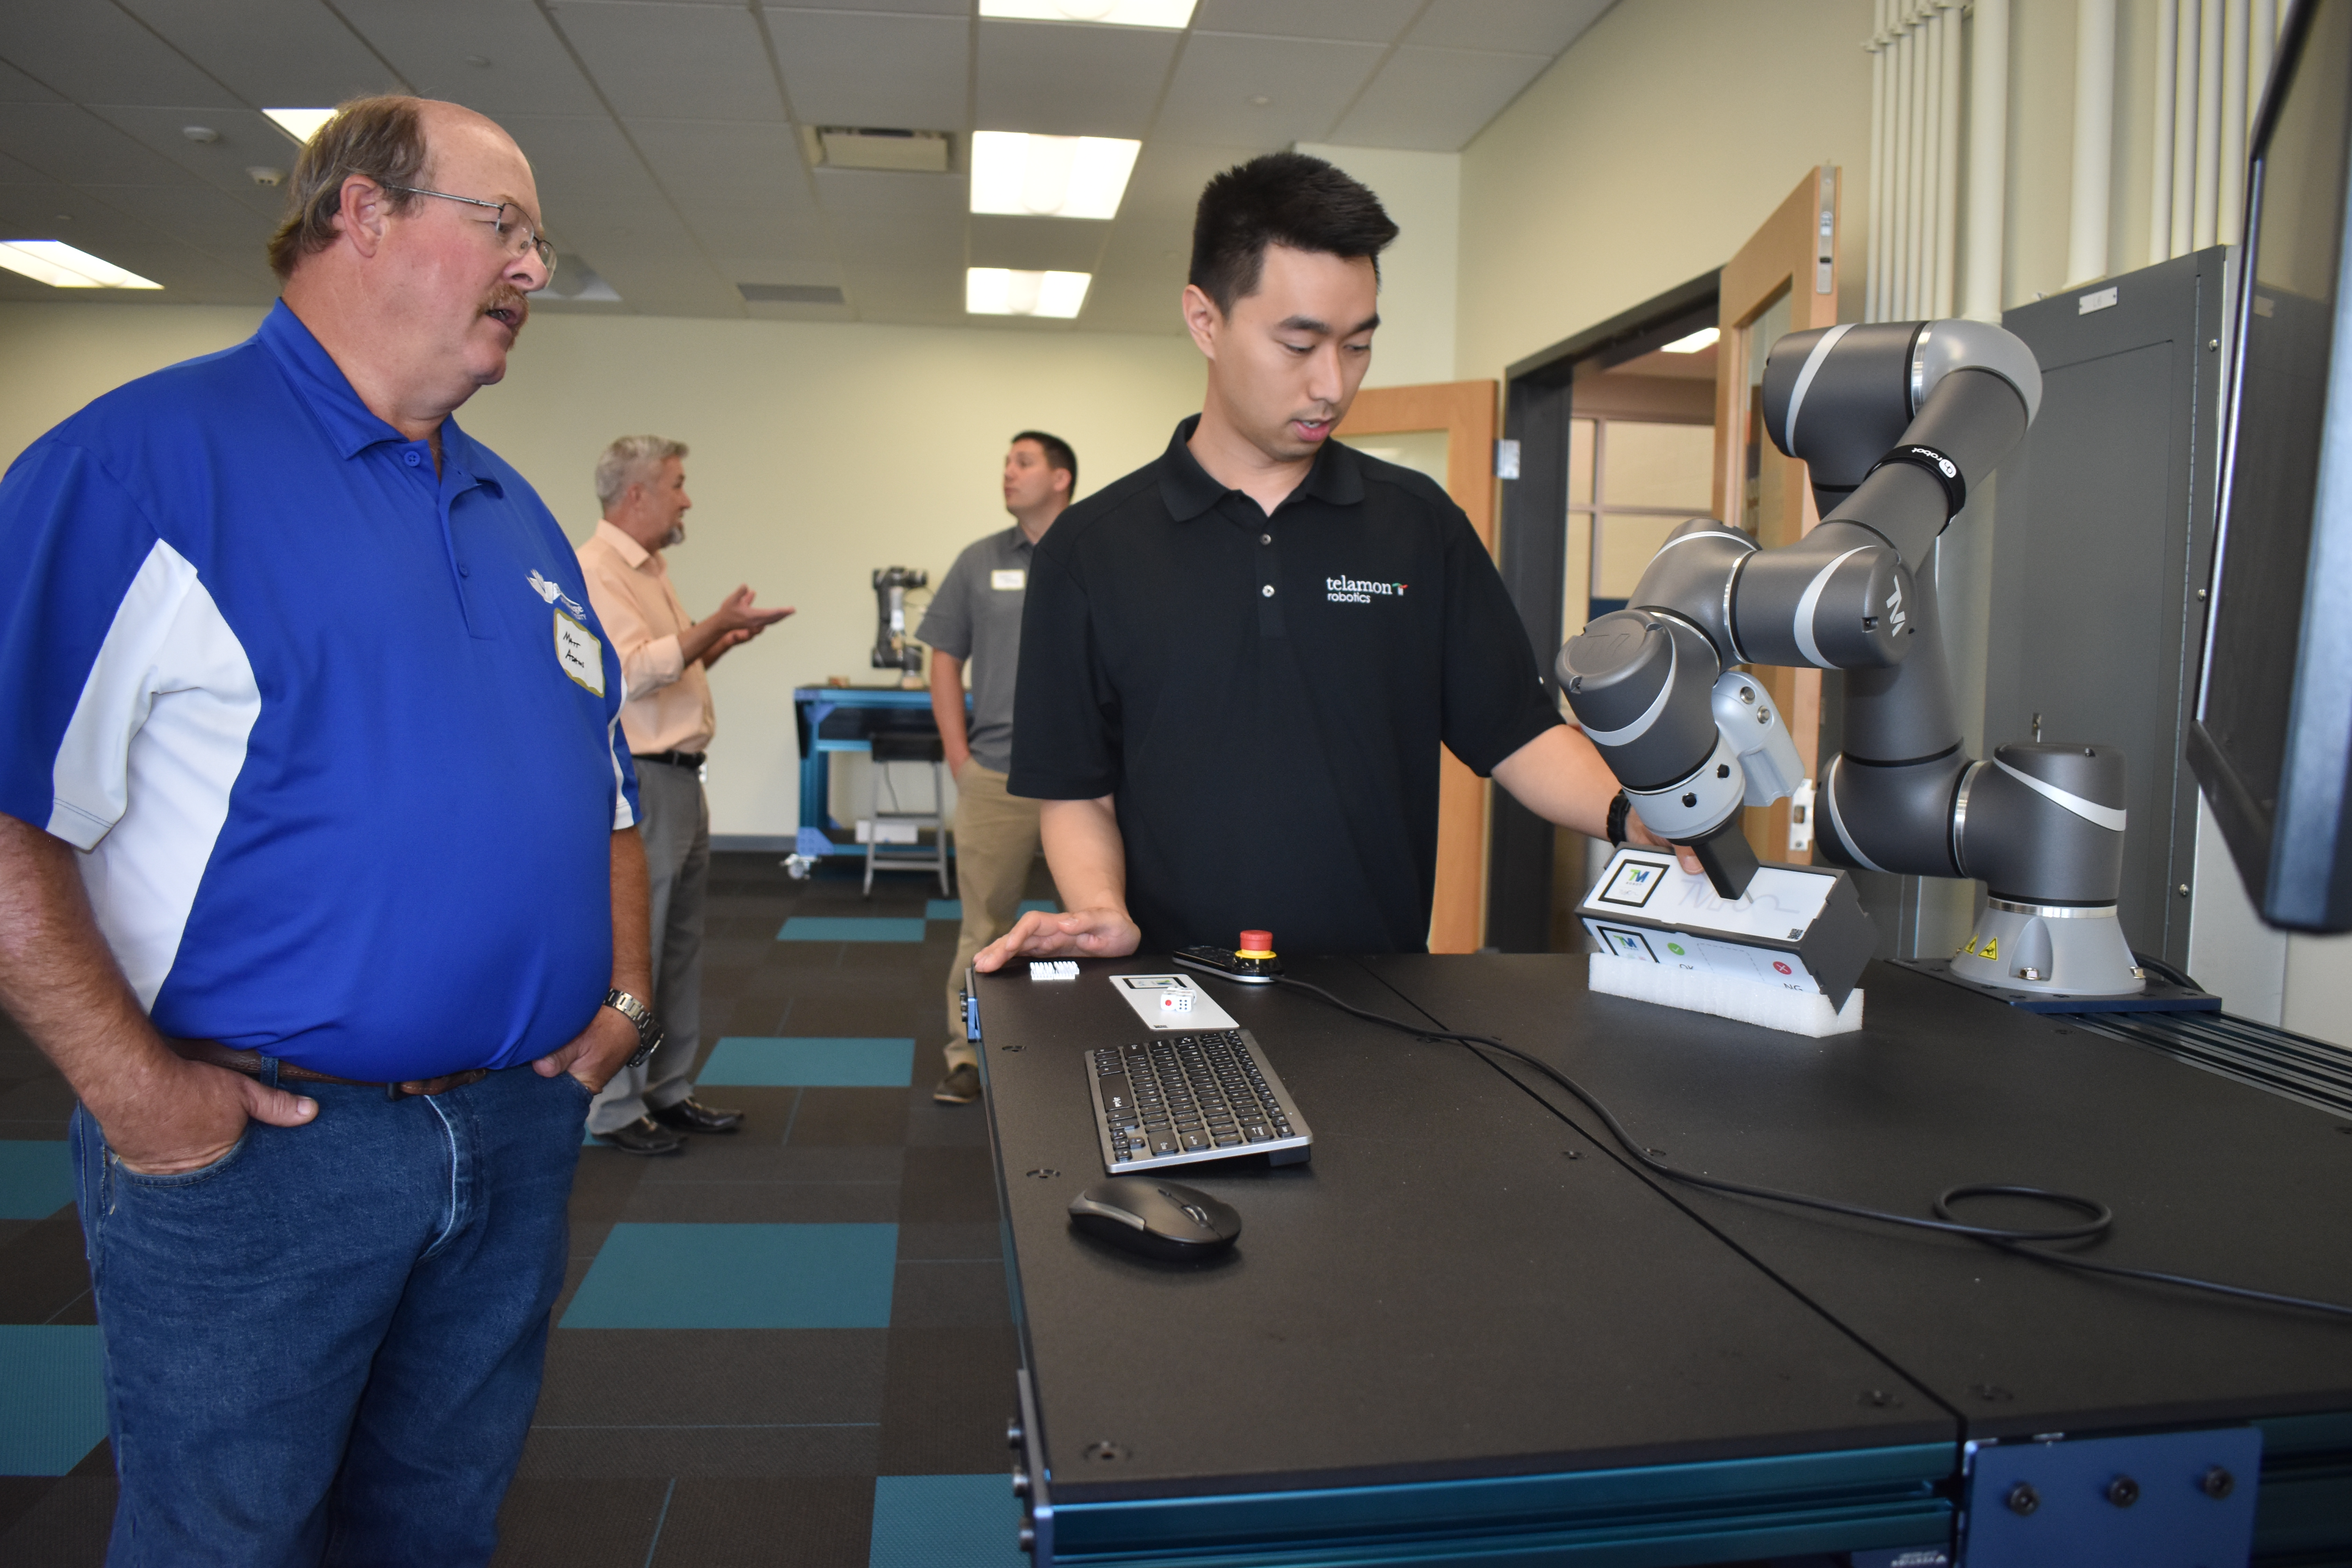 A Telamon Robotics employee demonstrates use of cobot to an instructor